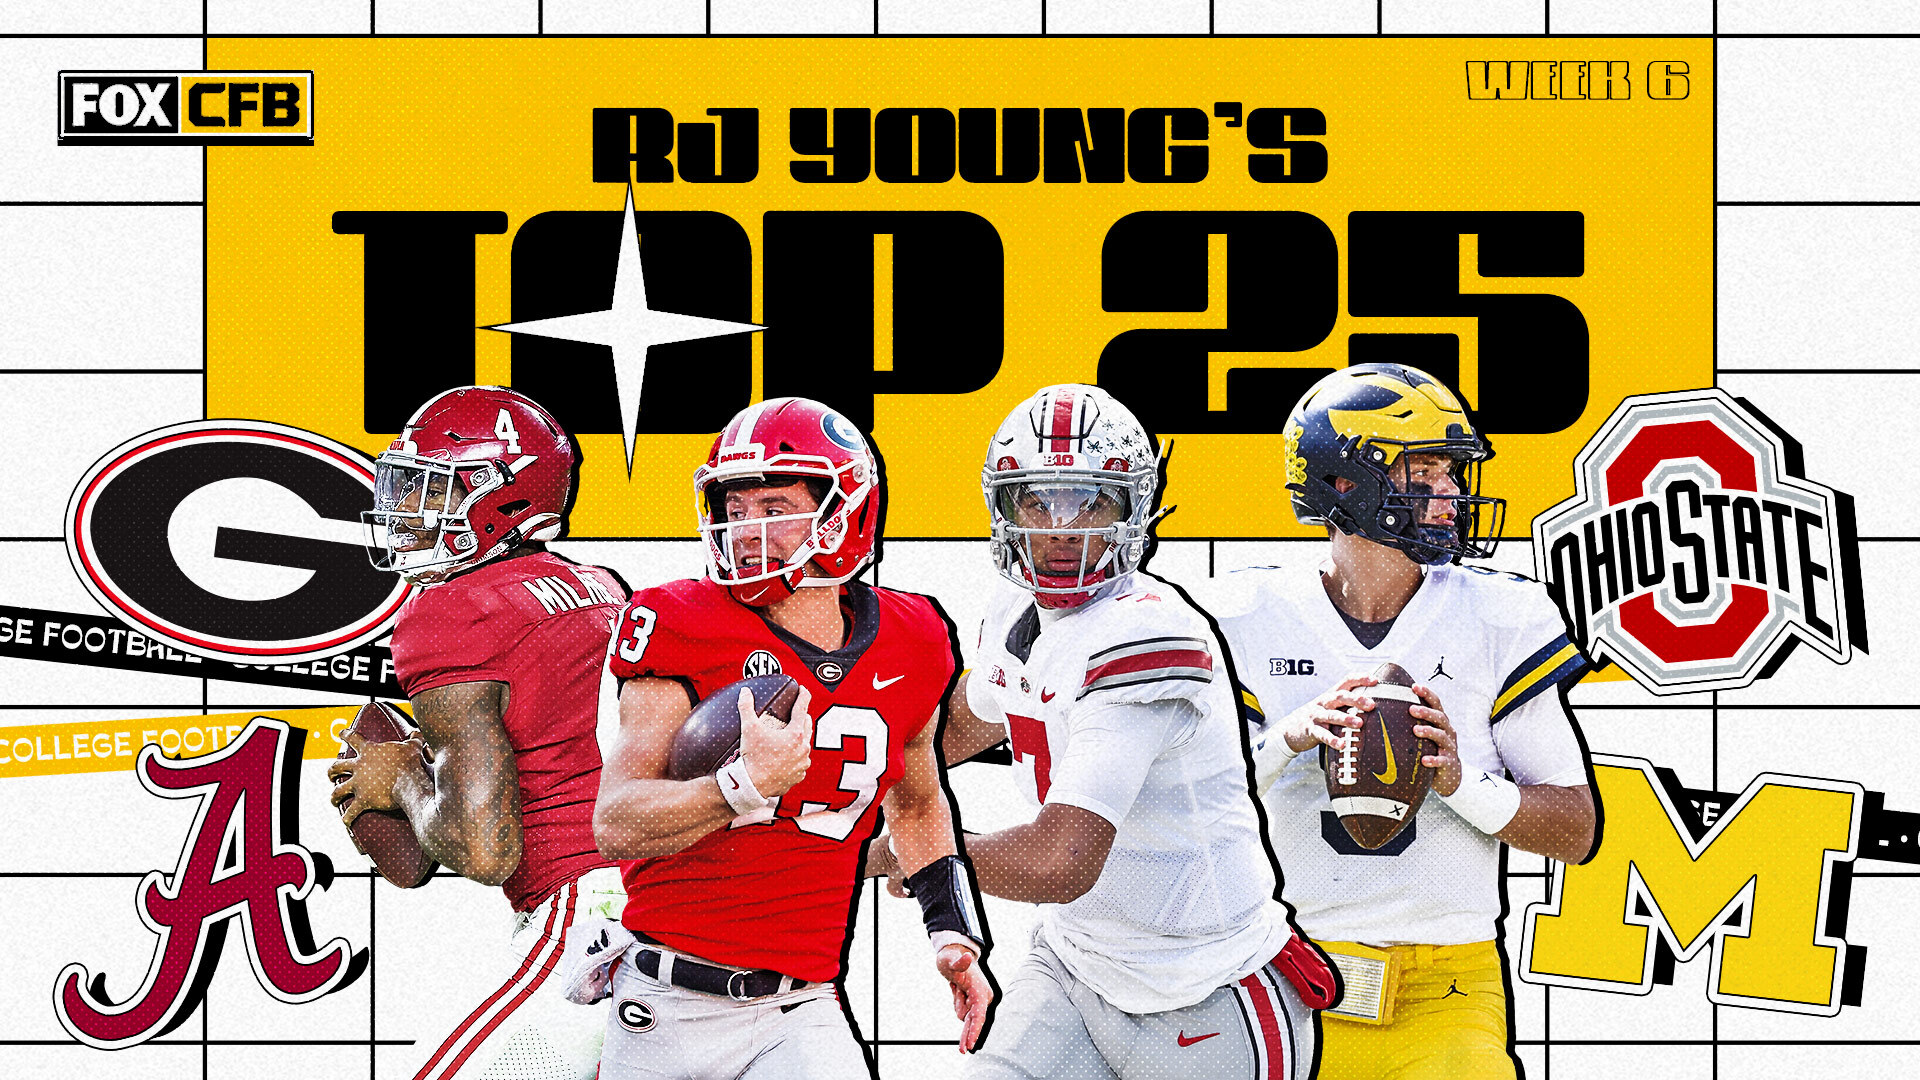 College football rankings: Ohio State tightens grip on No. 1